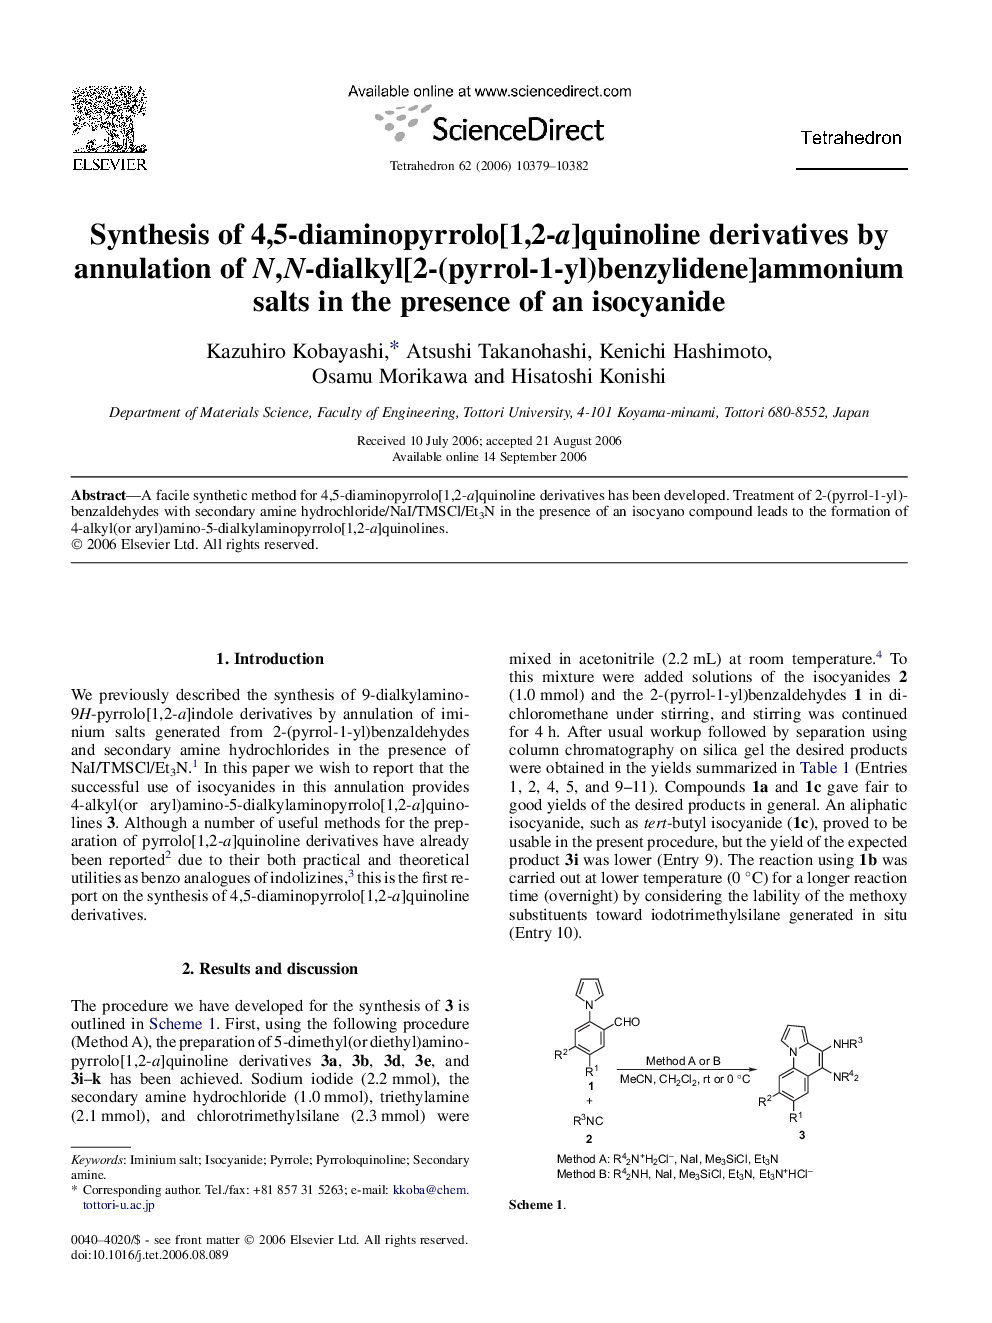 Synthesis of 4,5-diaminopyrrolo[1,2-a]quinoline derivatives by annulation of N,N-dialkyl[2-(pyrrol-1-yl)benzylidene]ammonium salts in the presence of an isocyanide